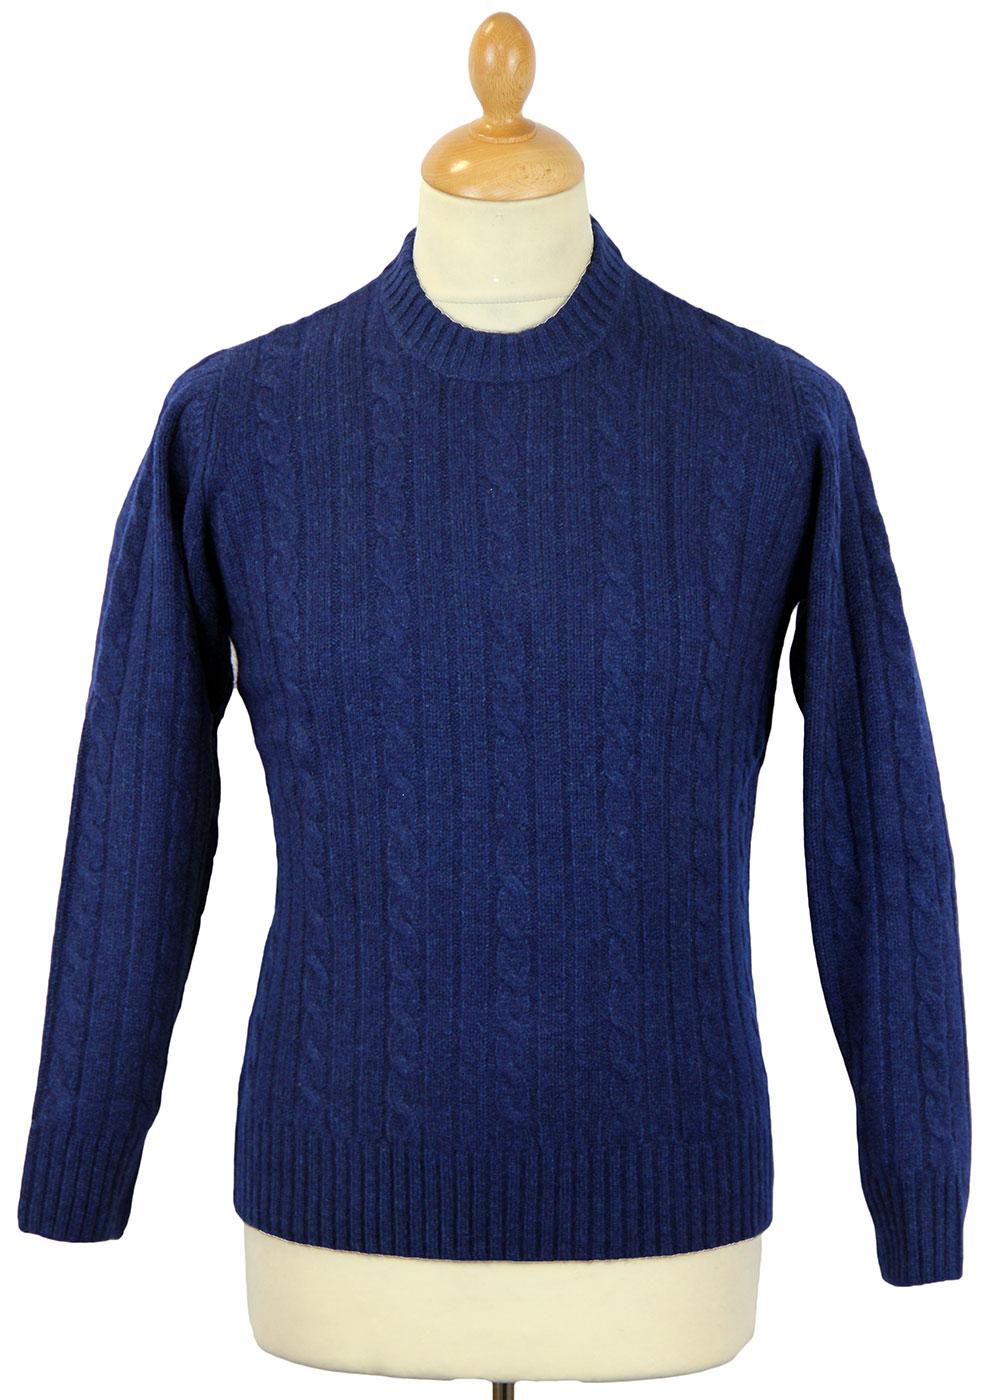 ALAN PAINE Rathmell Retro Mod Cable Knit Lambswool Jumper Indigo